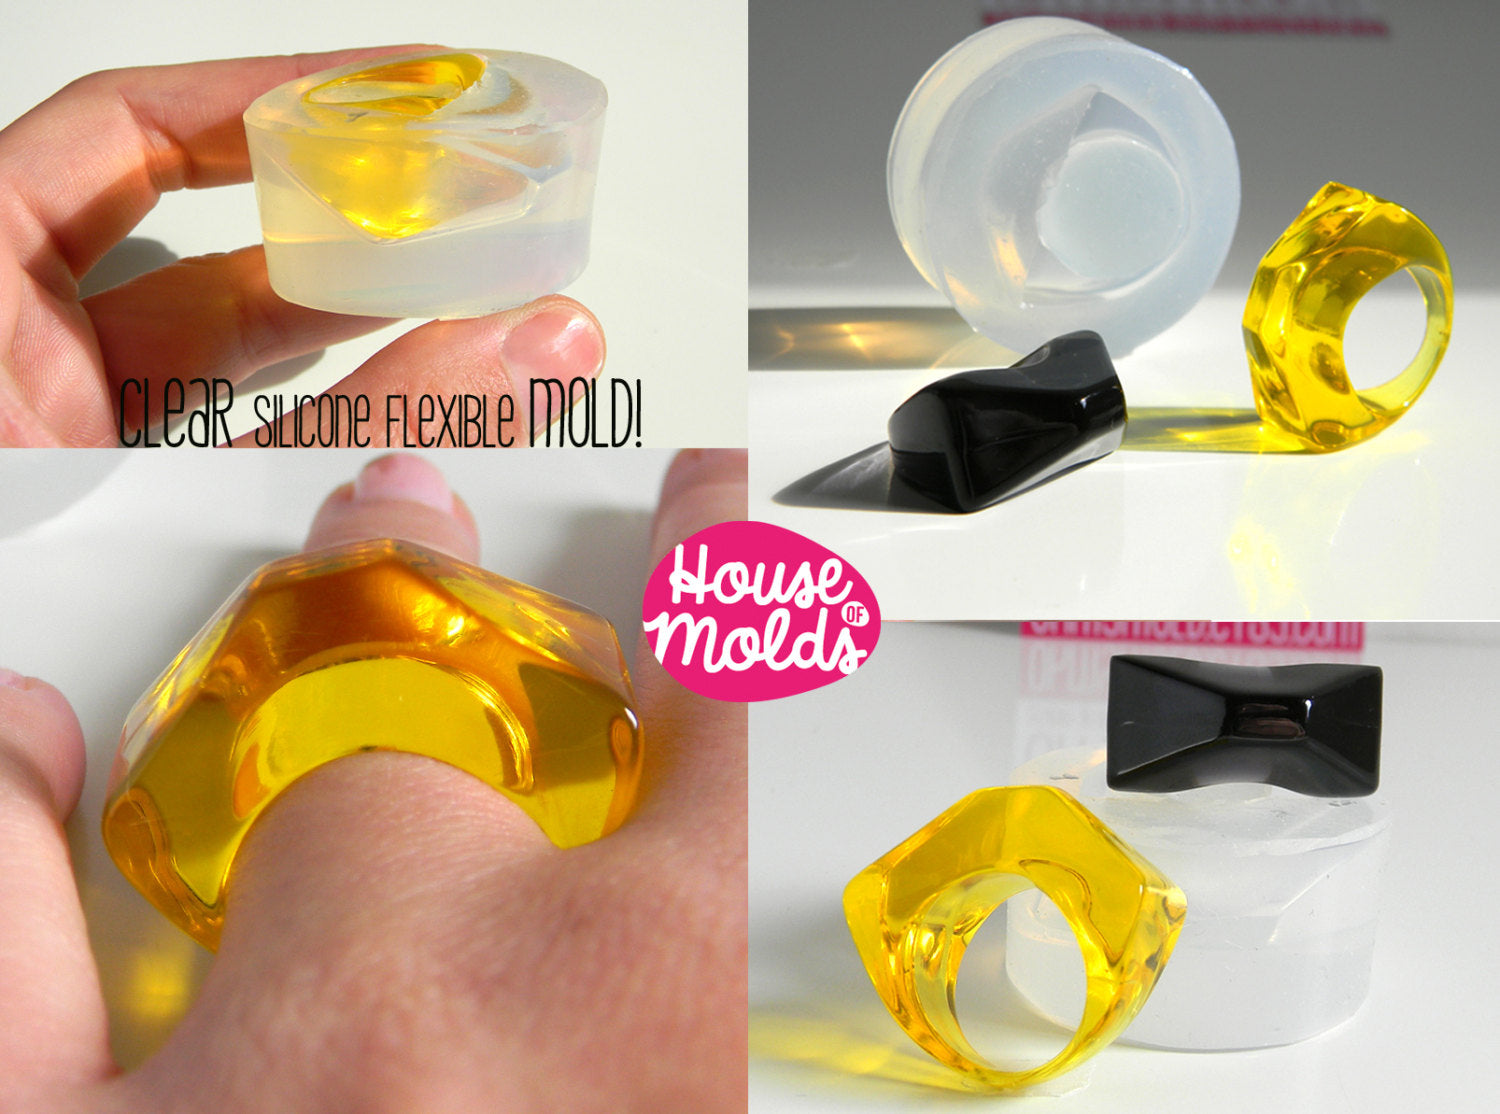 Clear Multi Size Oval Bubble Rings- Clear Mold to make 4 size